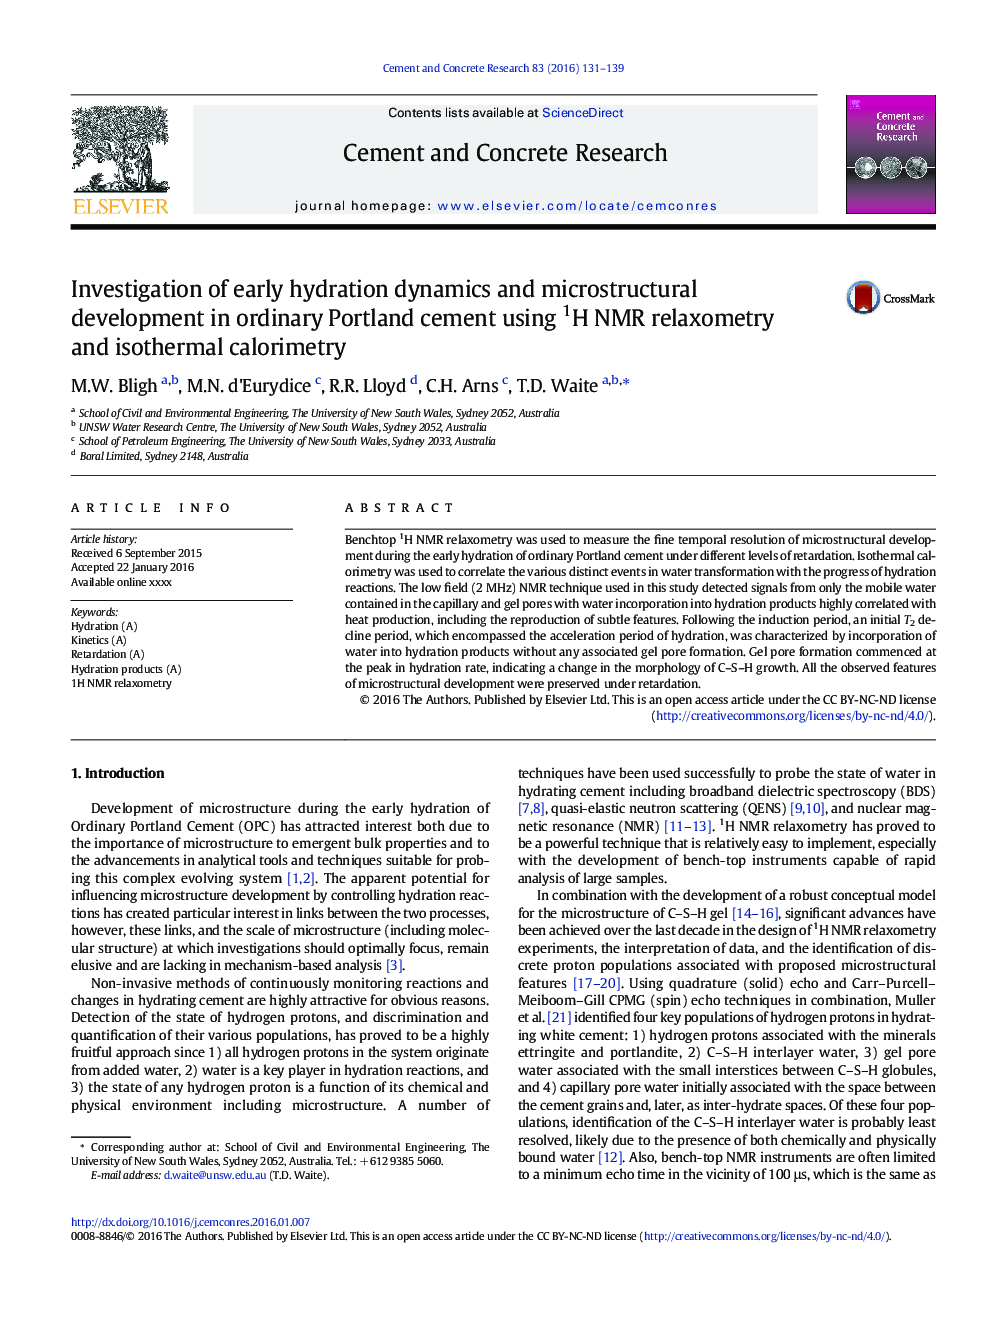 Investigation of early hydration dynamics and microstructural development in ordinary Portland cement using 1H NMR relaxometry and isothermal calorimetry